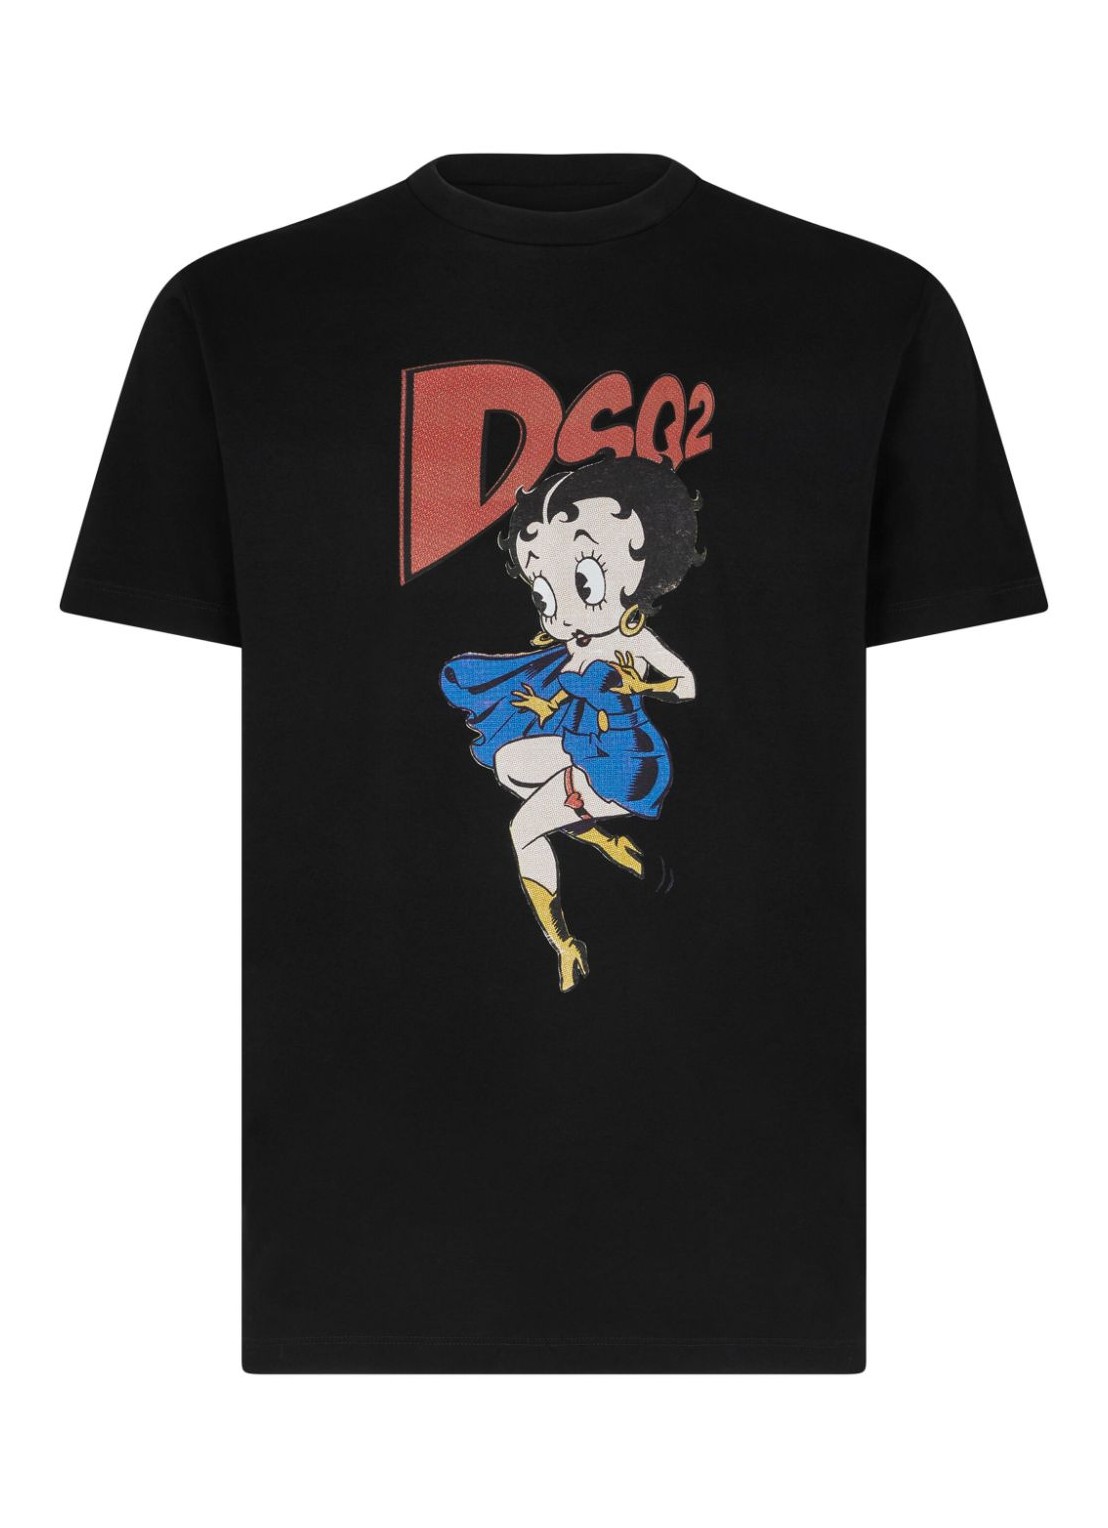 Camiseta dsquared t-shirt man betty boop cool fit tee s74gd1269s23009 900 talla M
 